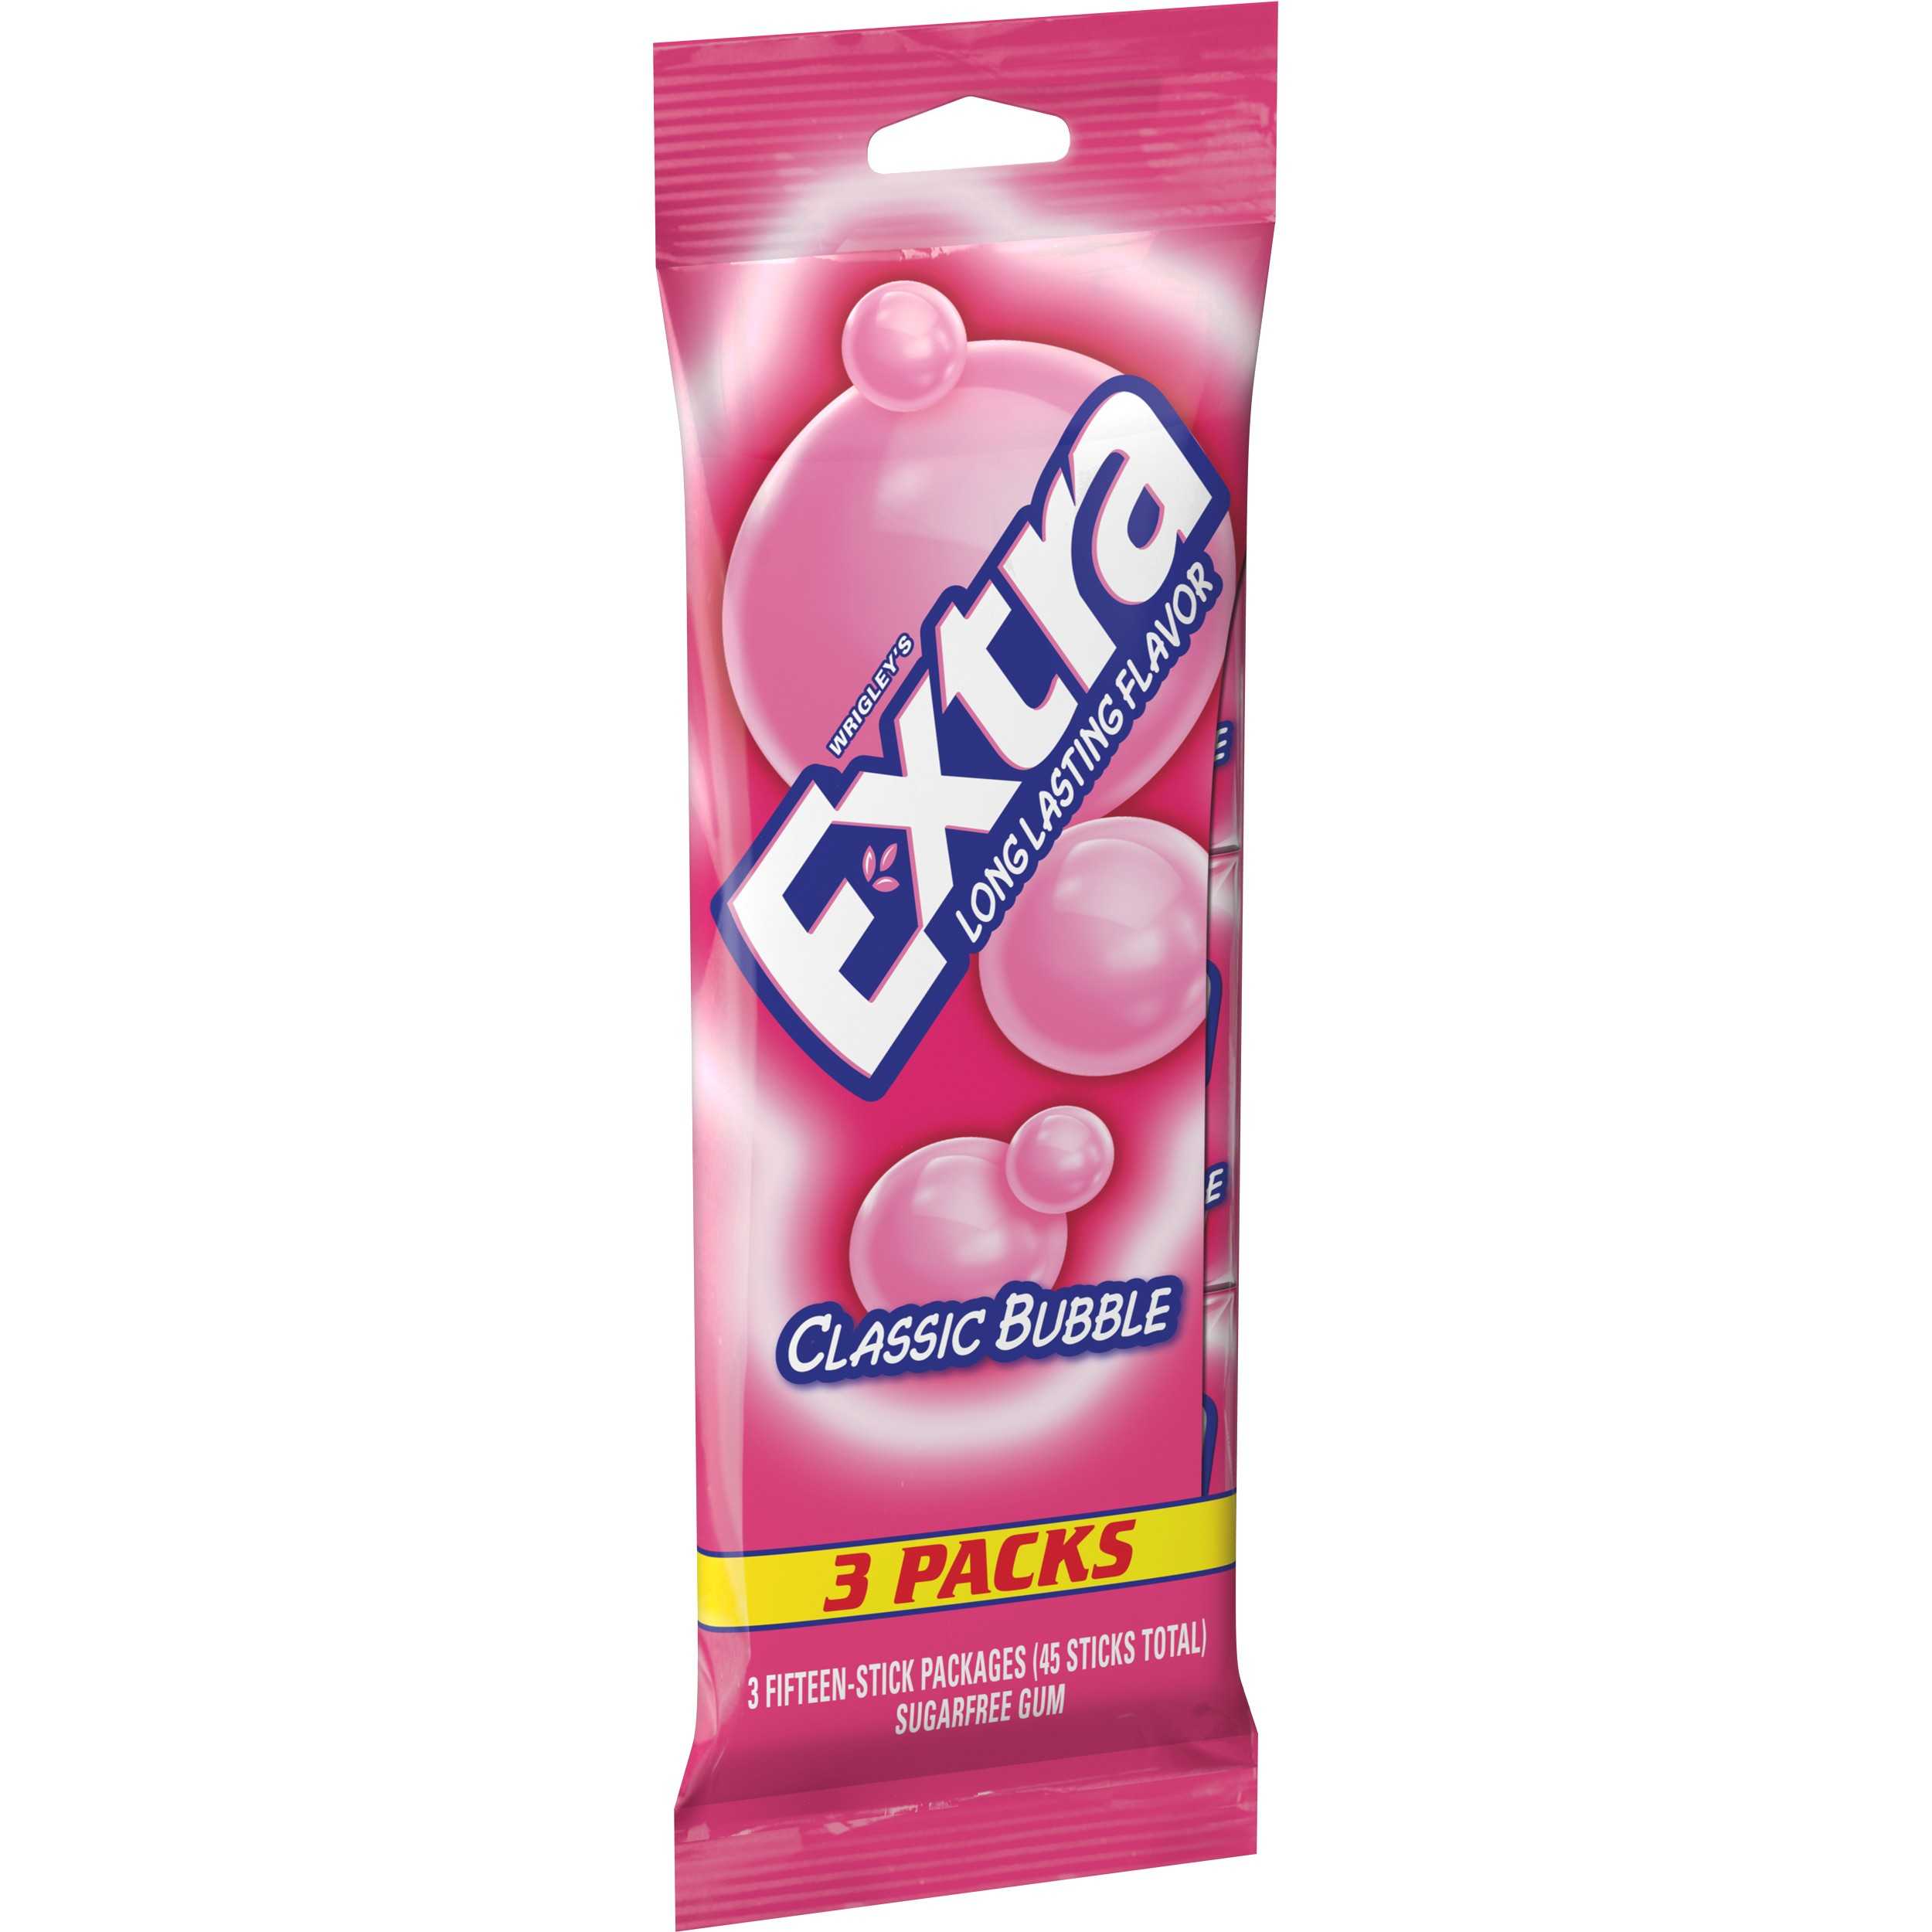 Extra, Sugar Free Classic Bubble Chewing Gum, 15 Stick Packs, 3 Count